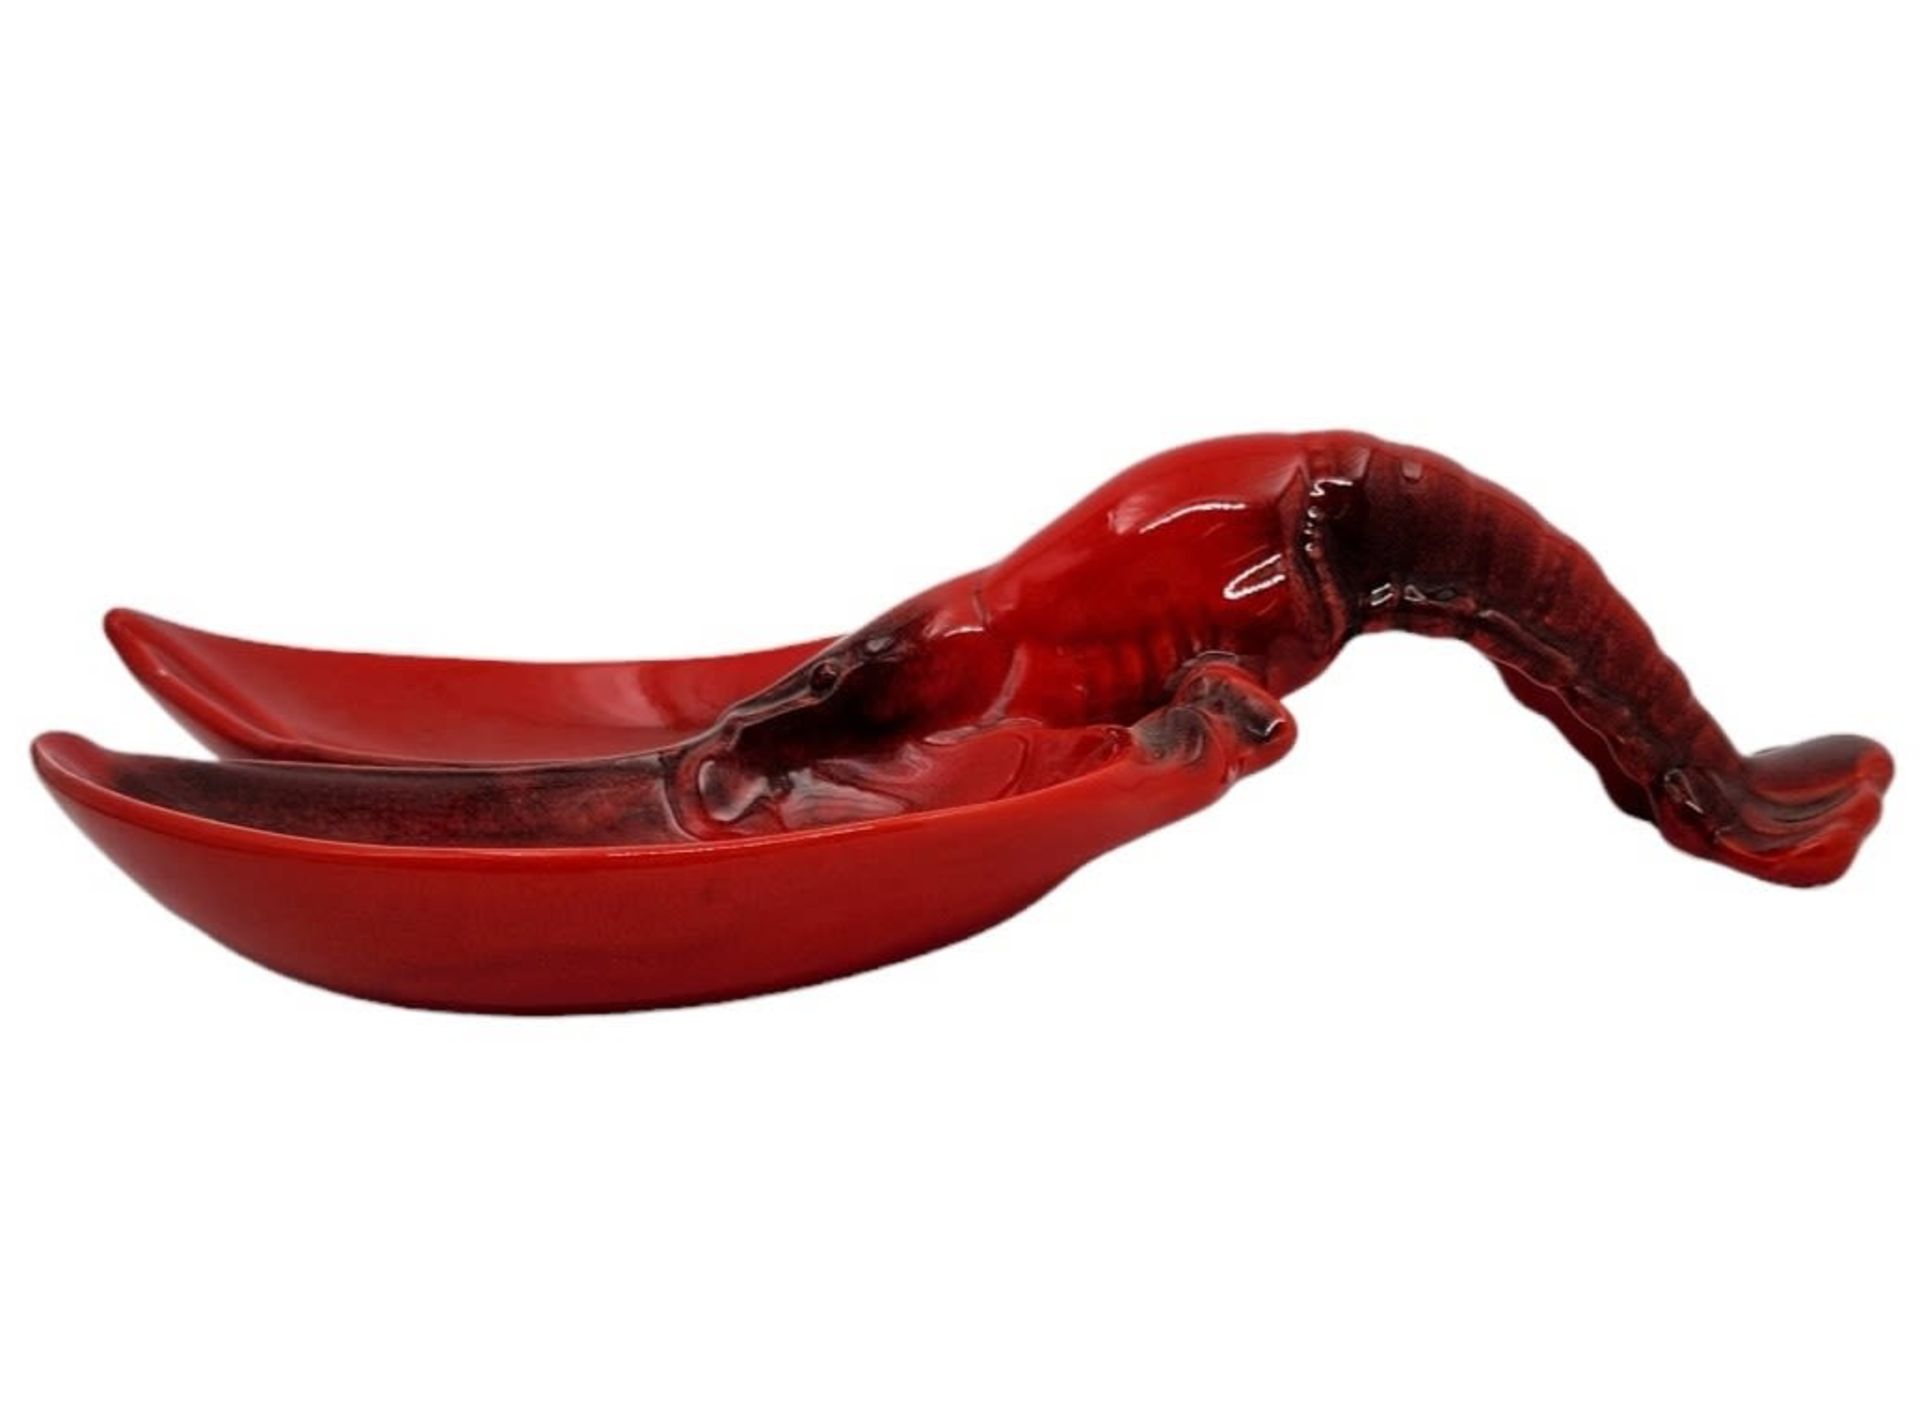 Two-compartment serving bowl, in the shape of a lobster, made of ceramic, decorated with a red tone. - Image 2 of 4